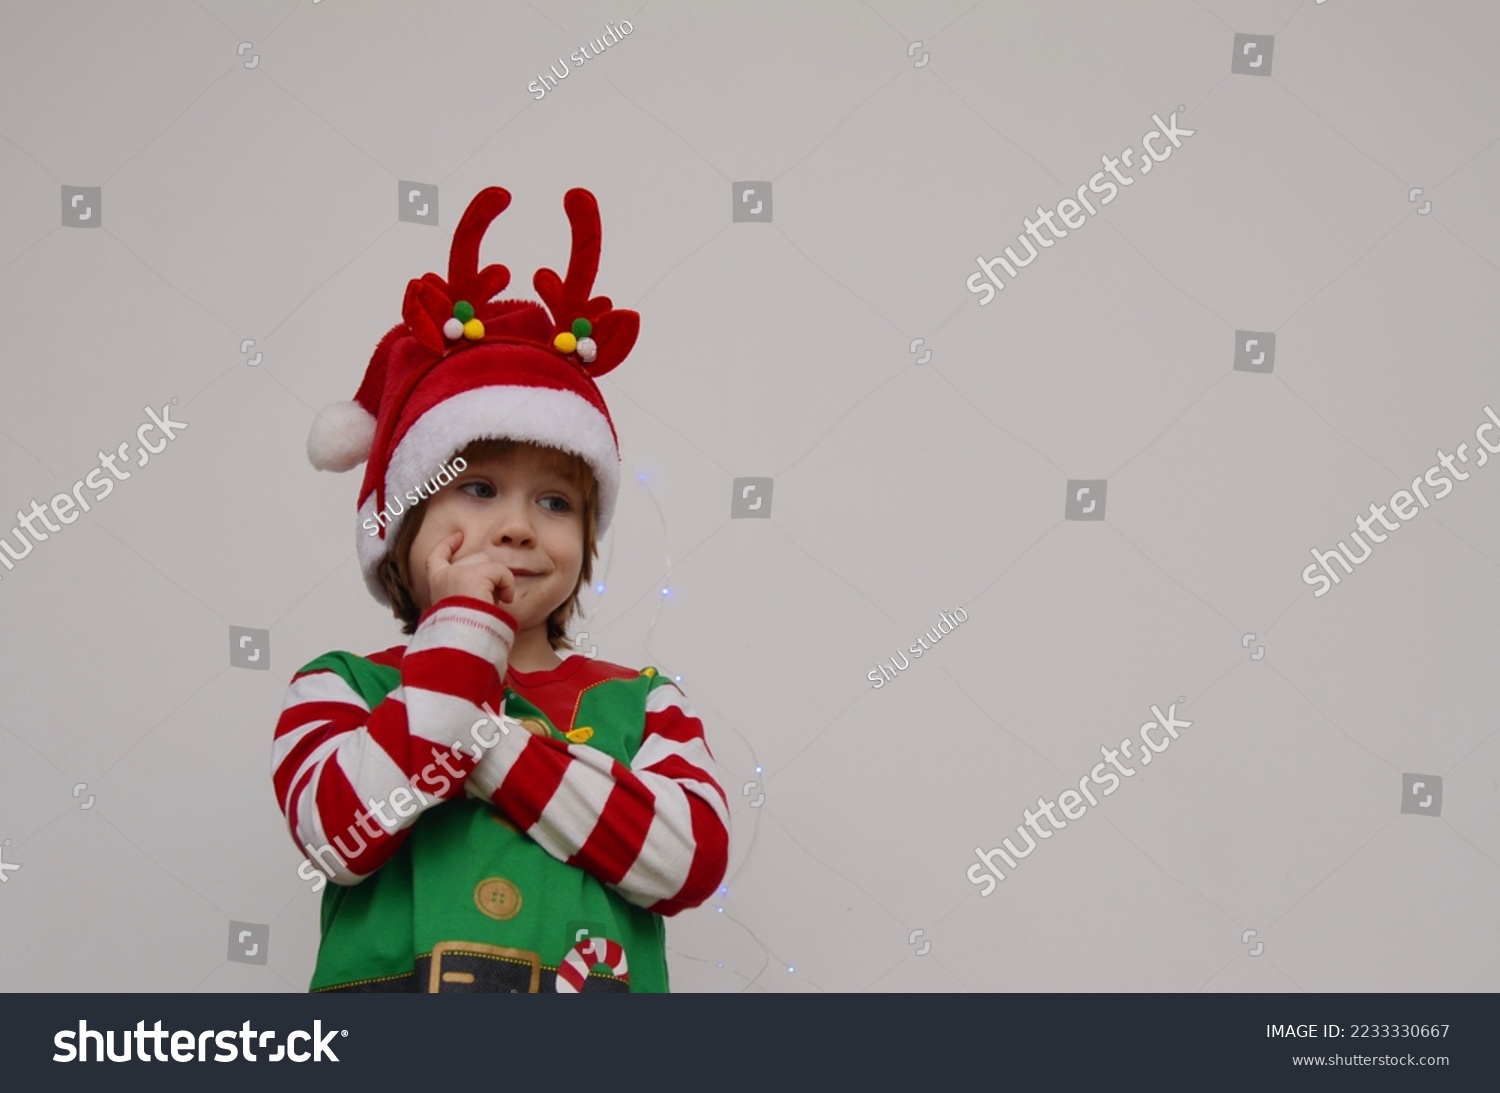 Child in Santa's hat, hand near face, Christmas waiting pose. Isolate on white, space for text #2233330667